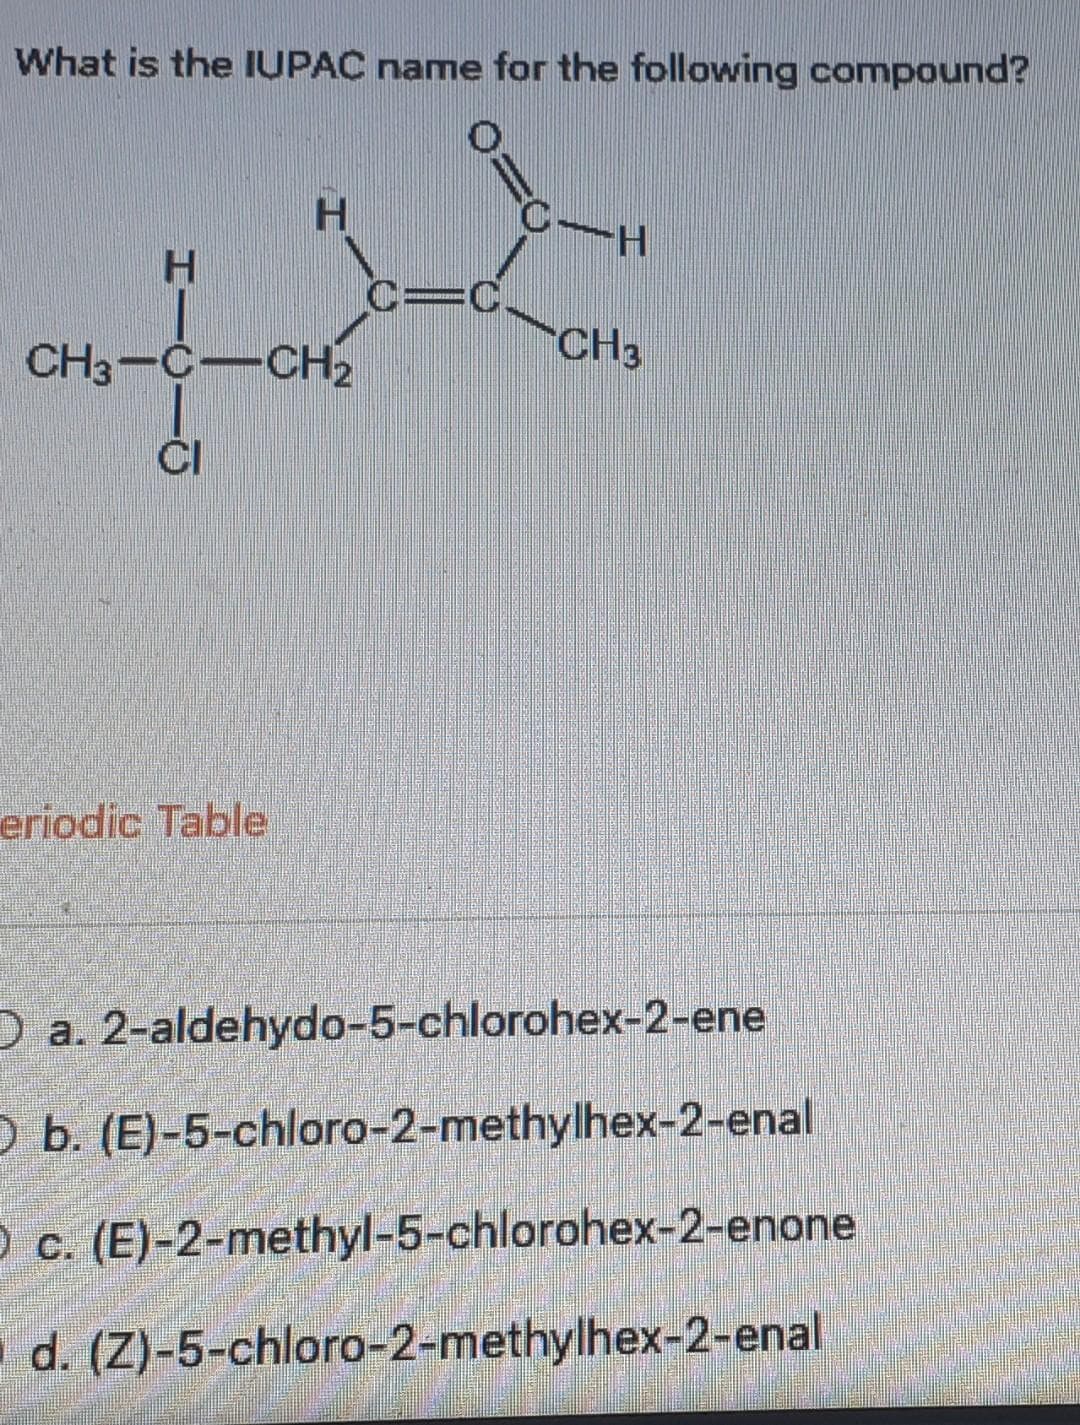 What is the IUPAC name for the following compound?
H
H
CH3-C-CH₂
eriodic Table
0.
C-H
CH3
O a. 2-aldehydo-5-chlorohex-2-ene
O b. (E)-5-chloro-2-methylhex-2-enal
O c. (E)-2-methyl-5-chlorohex-2-enone
d. (Z)-5-chloro-2-methylhex-2-enal